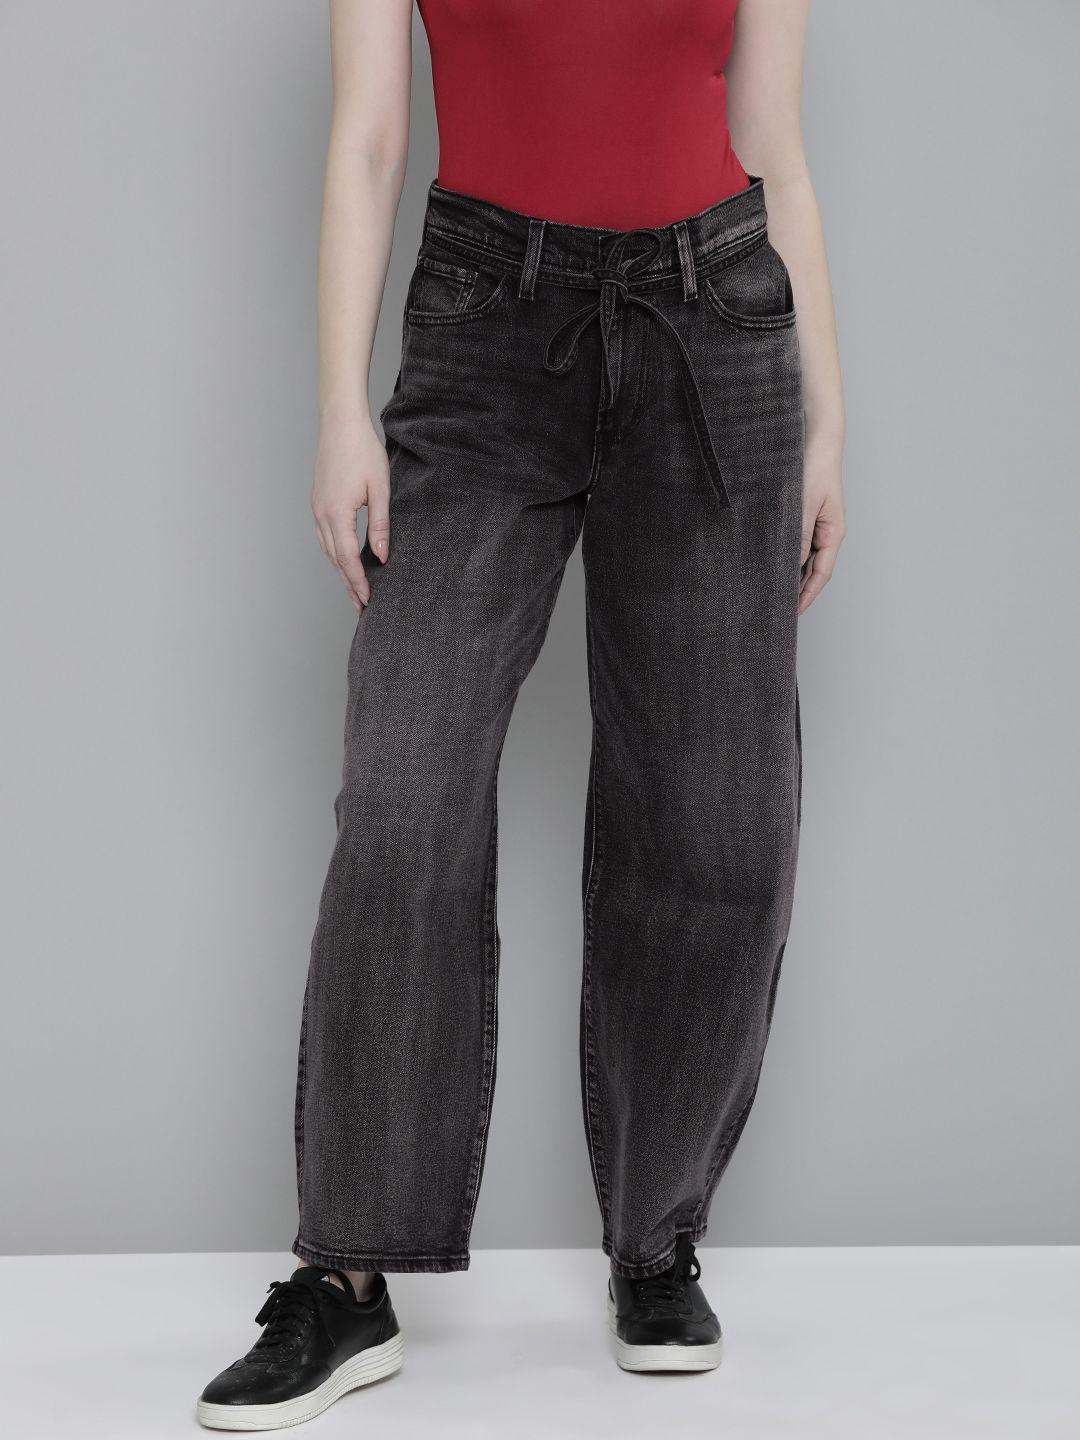 levis women heavy fade stretchable jeans comes with denim fabric belt